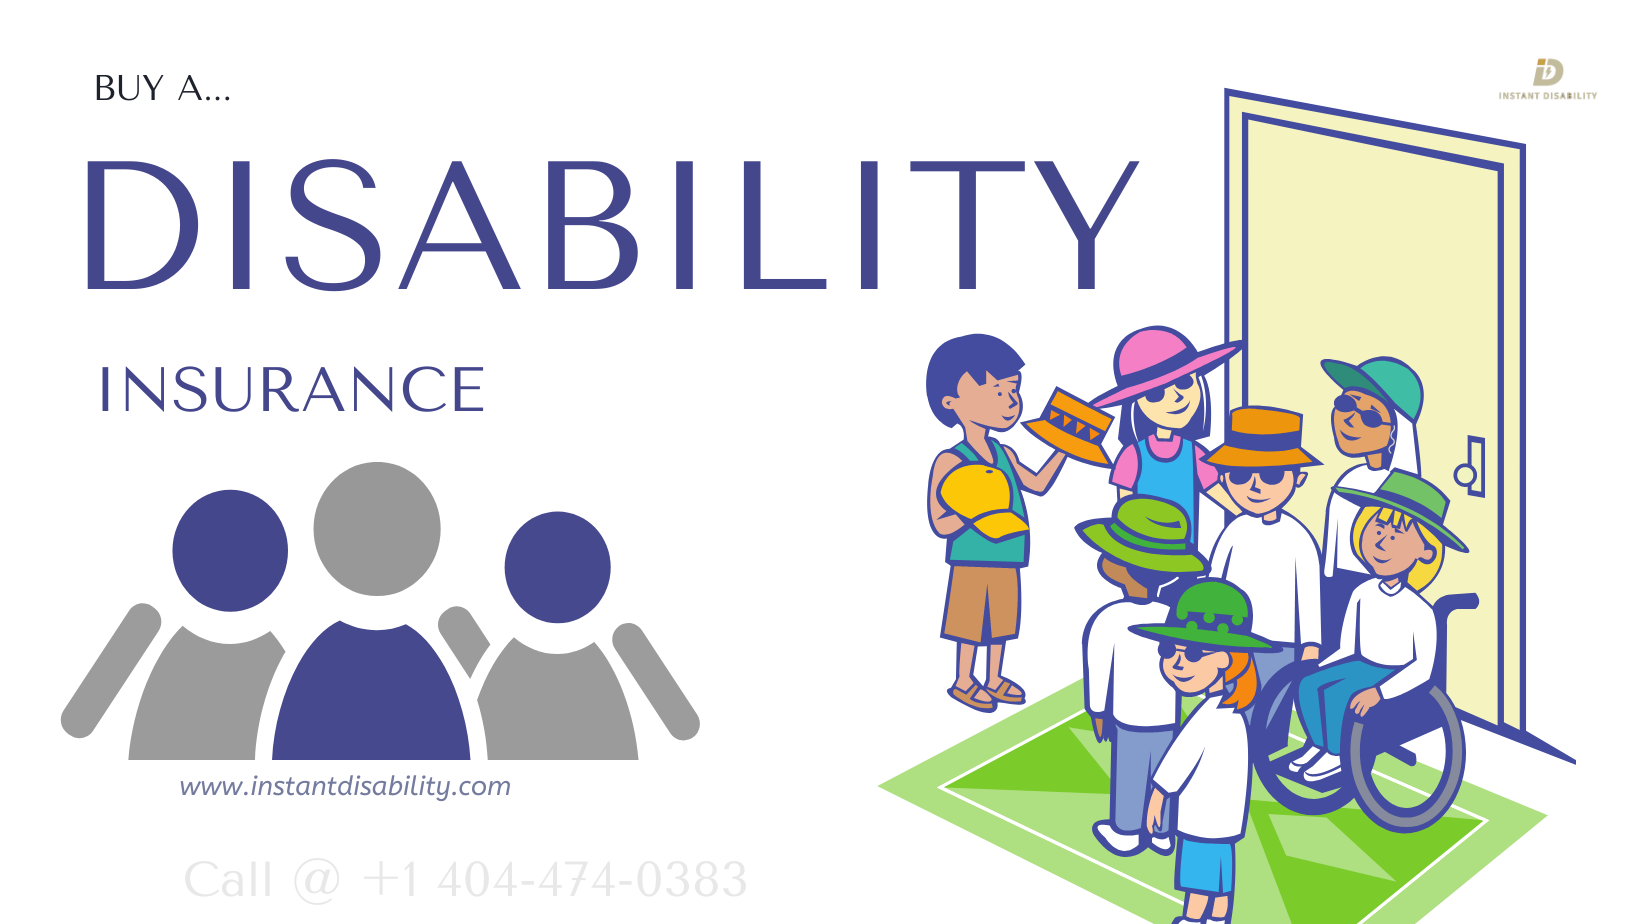 Buy disability insurance